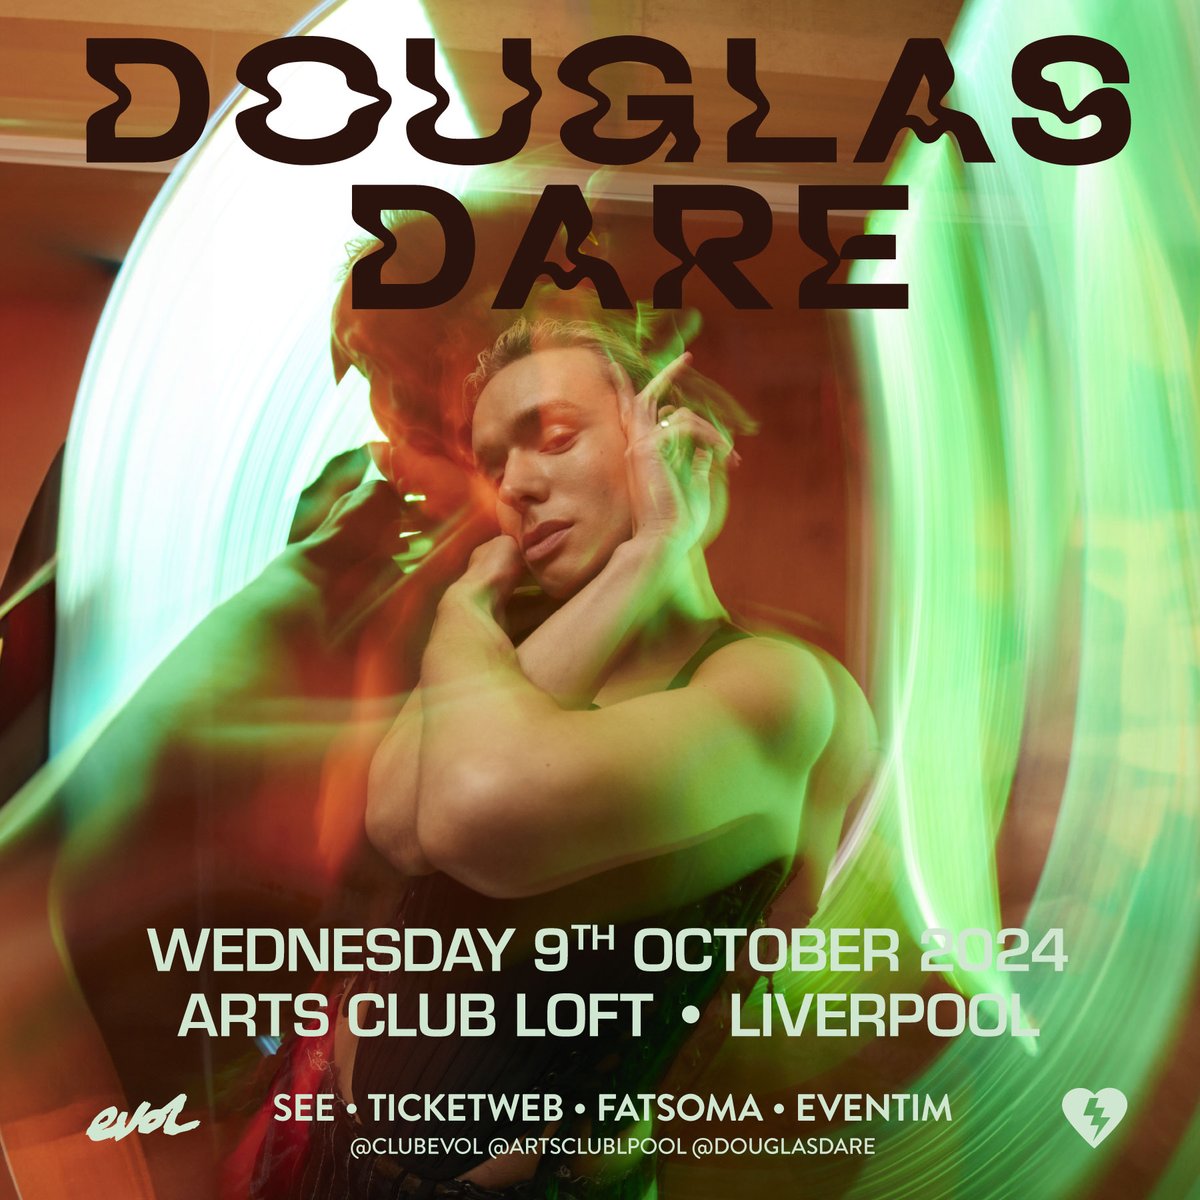 𝐂𝐎𝐕𝐄𝐑 𝐒𝐓𝐀𝐑 𝐀𝐋𝐄𝐑𝐓! @DouglasDare cover interview in the latest @FAULTMagazine off the back of the scintillating new LP 𝐎𝐌𝐍𝐈 - out now @ErasedTapes. Read on... fault-magazine.com/2024/05/dougla… Douglas headlines @artsclublpool October 9th. Tickets: seetickets.com/event/douglas-…